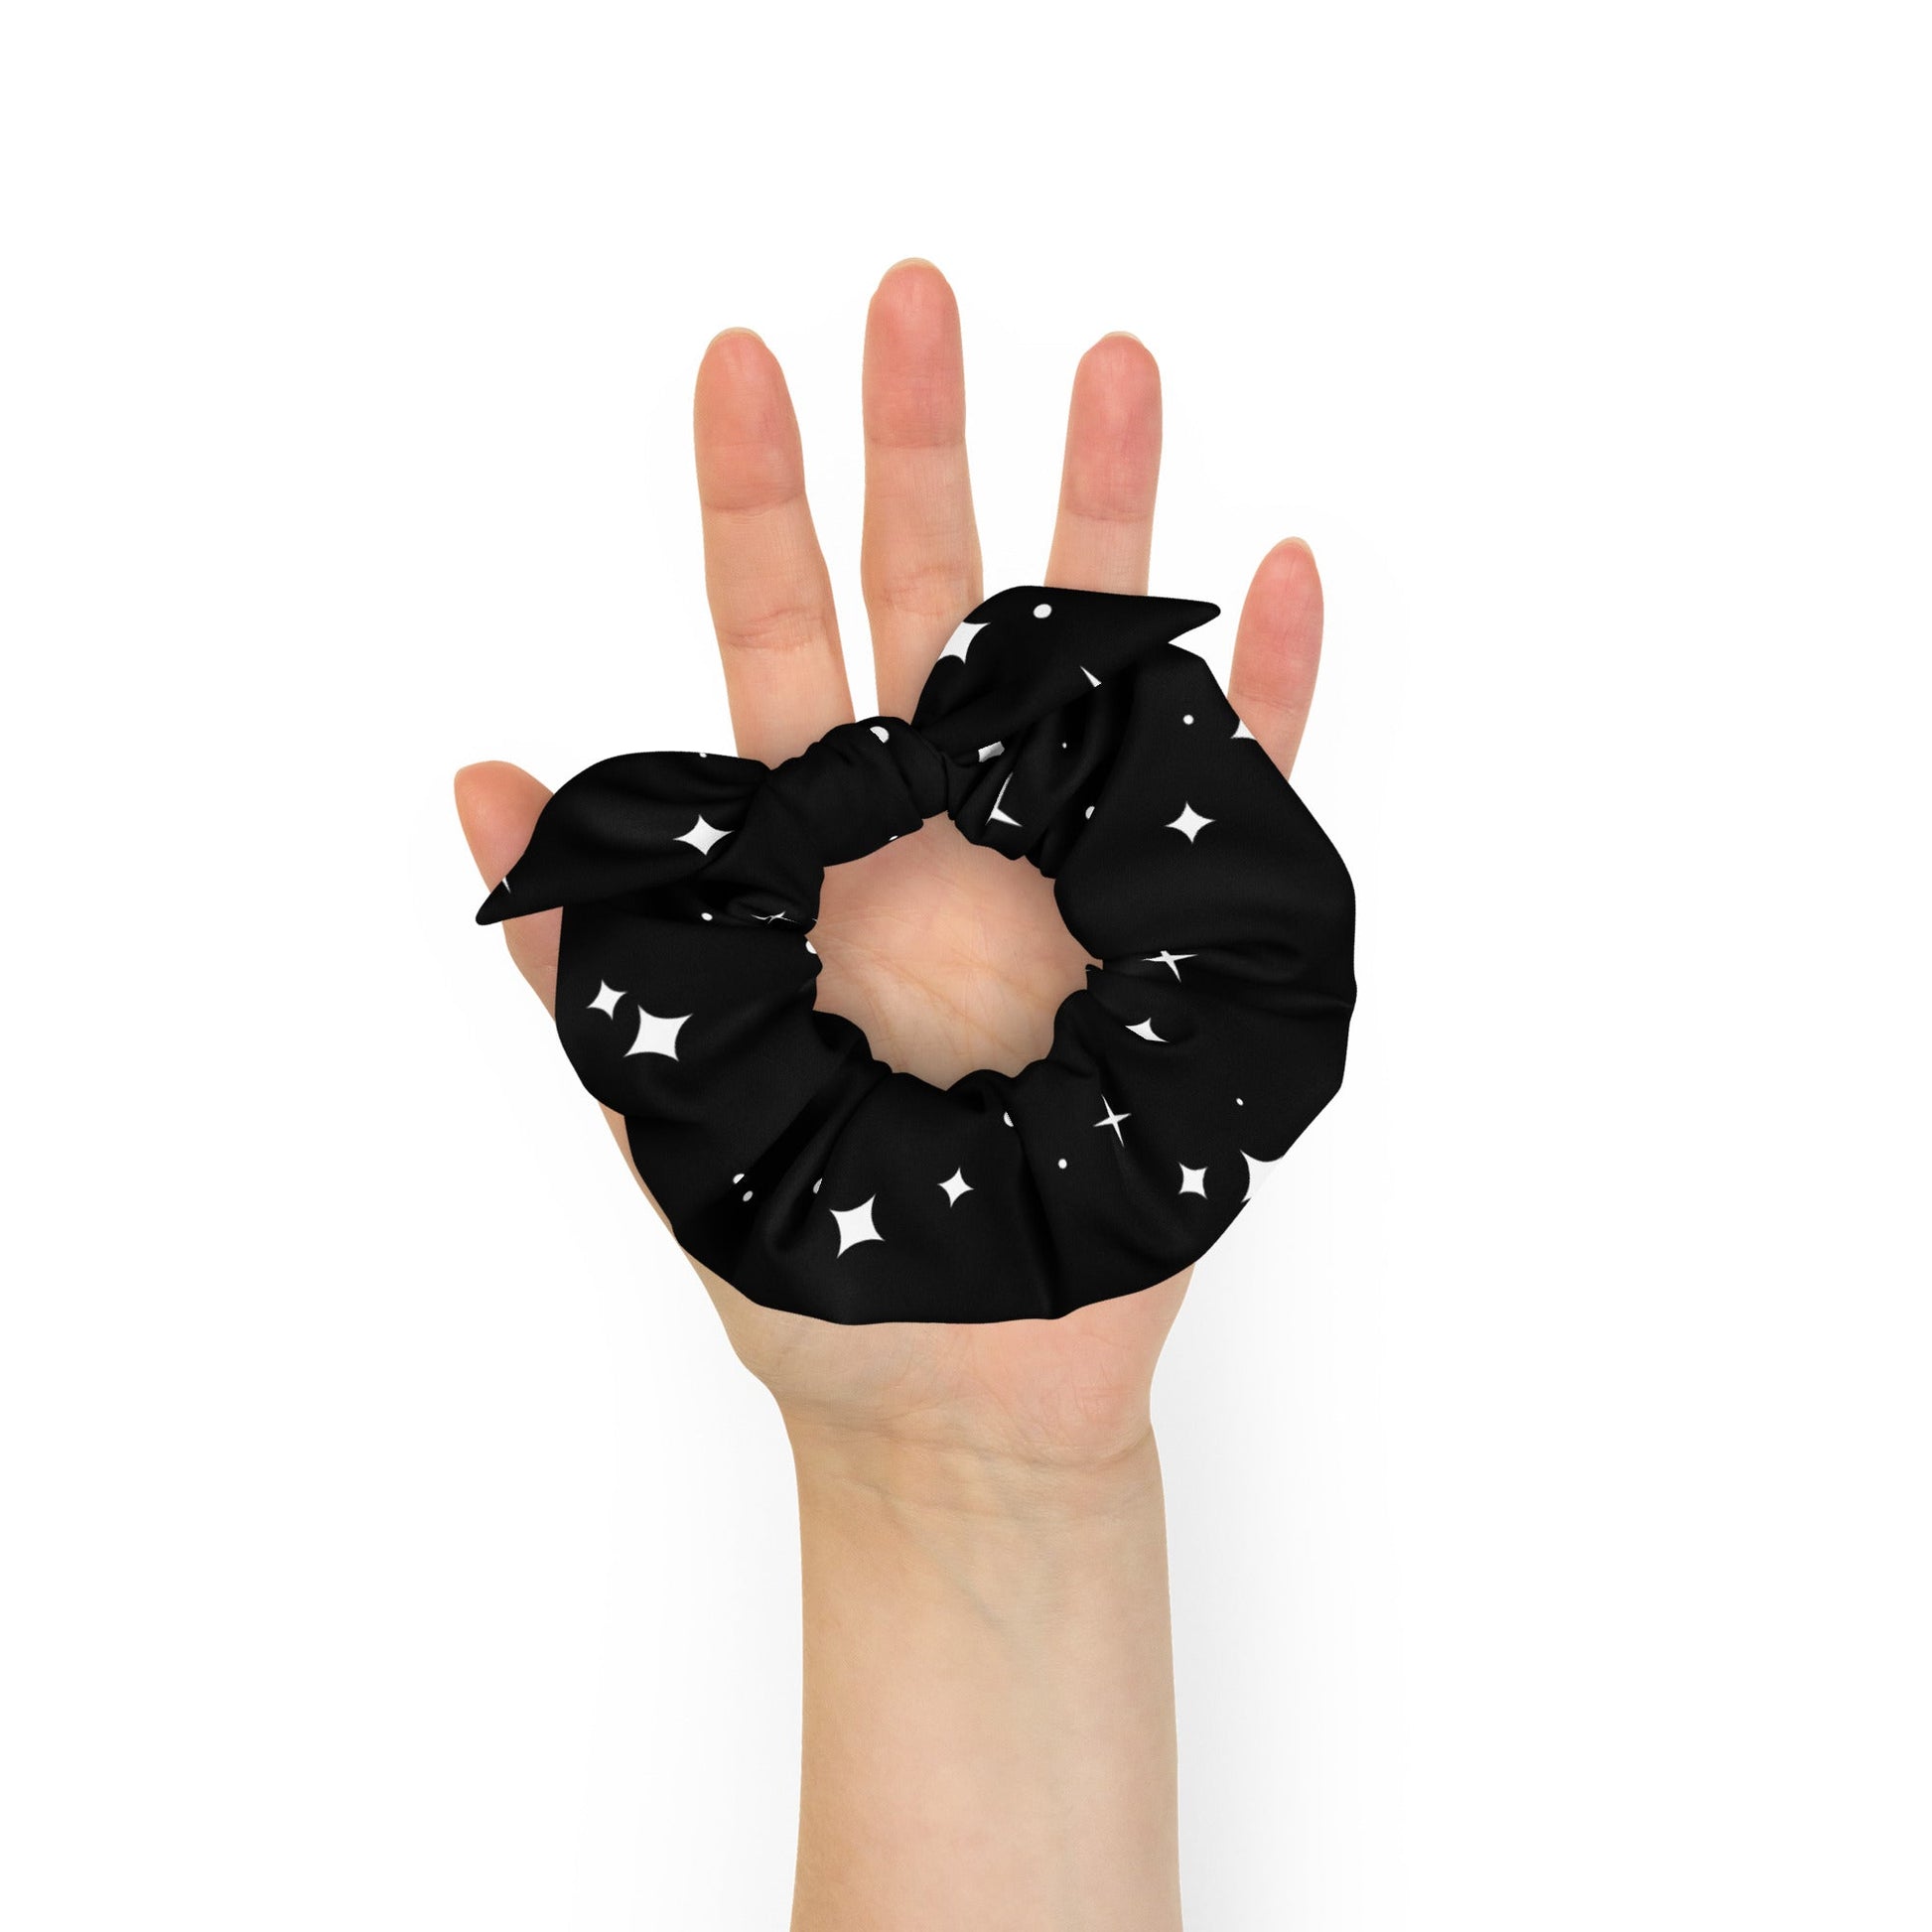 Starlight Style: Elevate Your Hair Game with Our Recycled Scrunchie Featuring Chic Black Star Prints